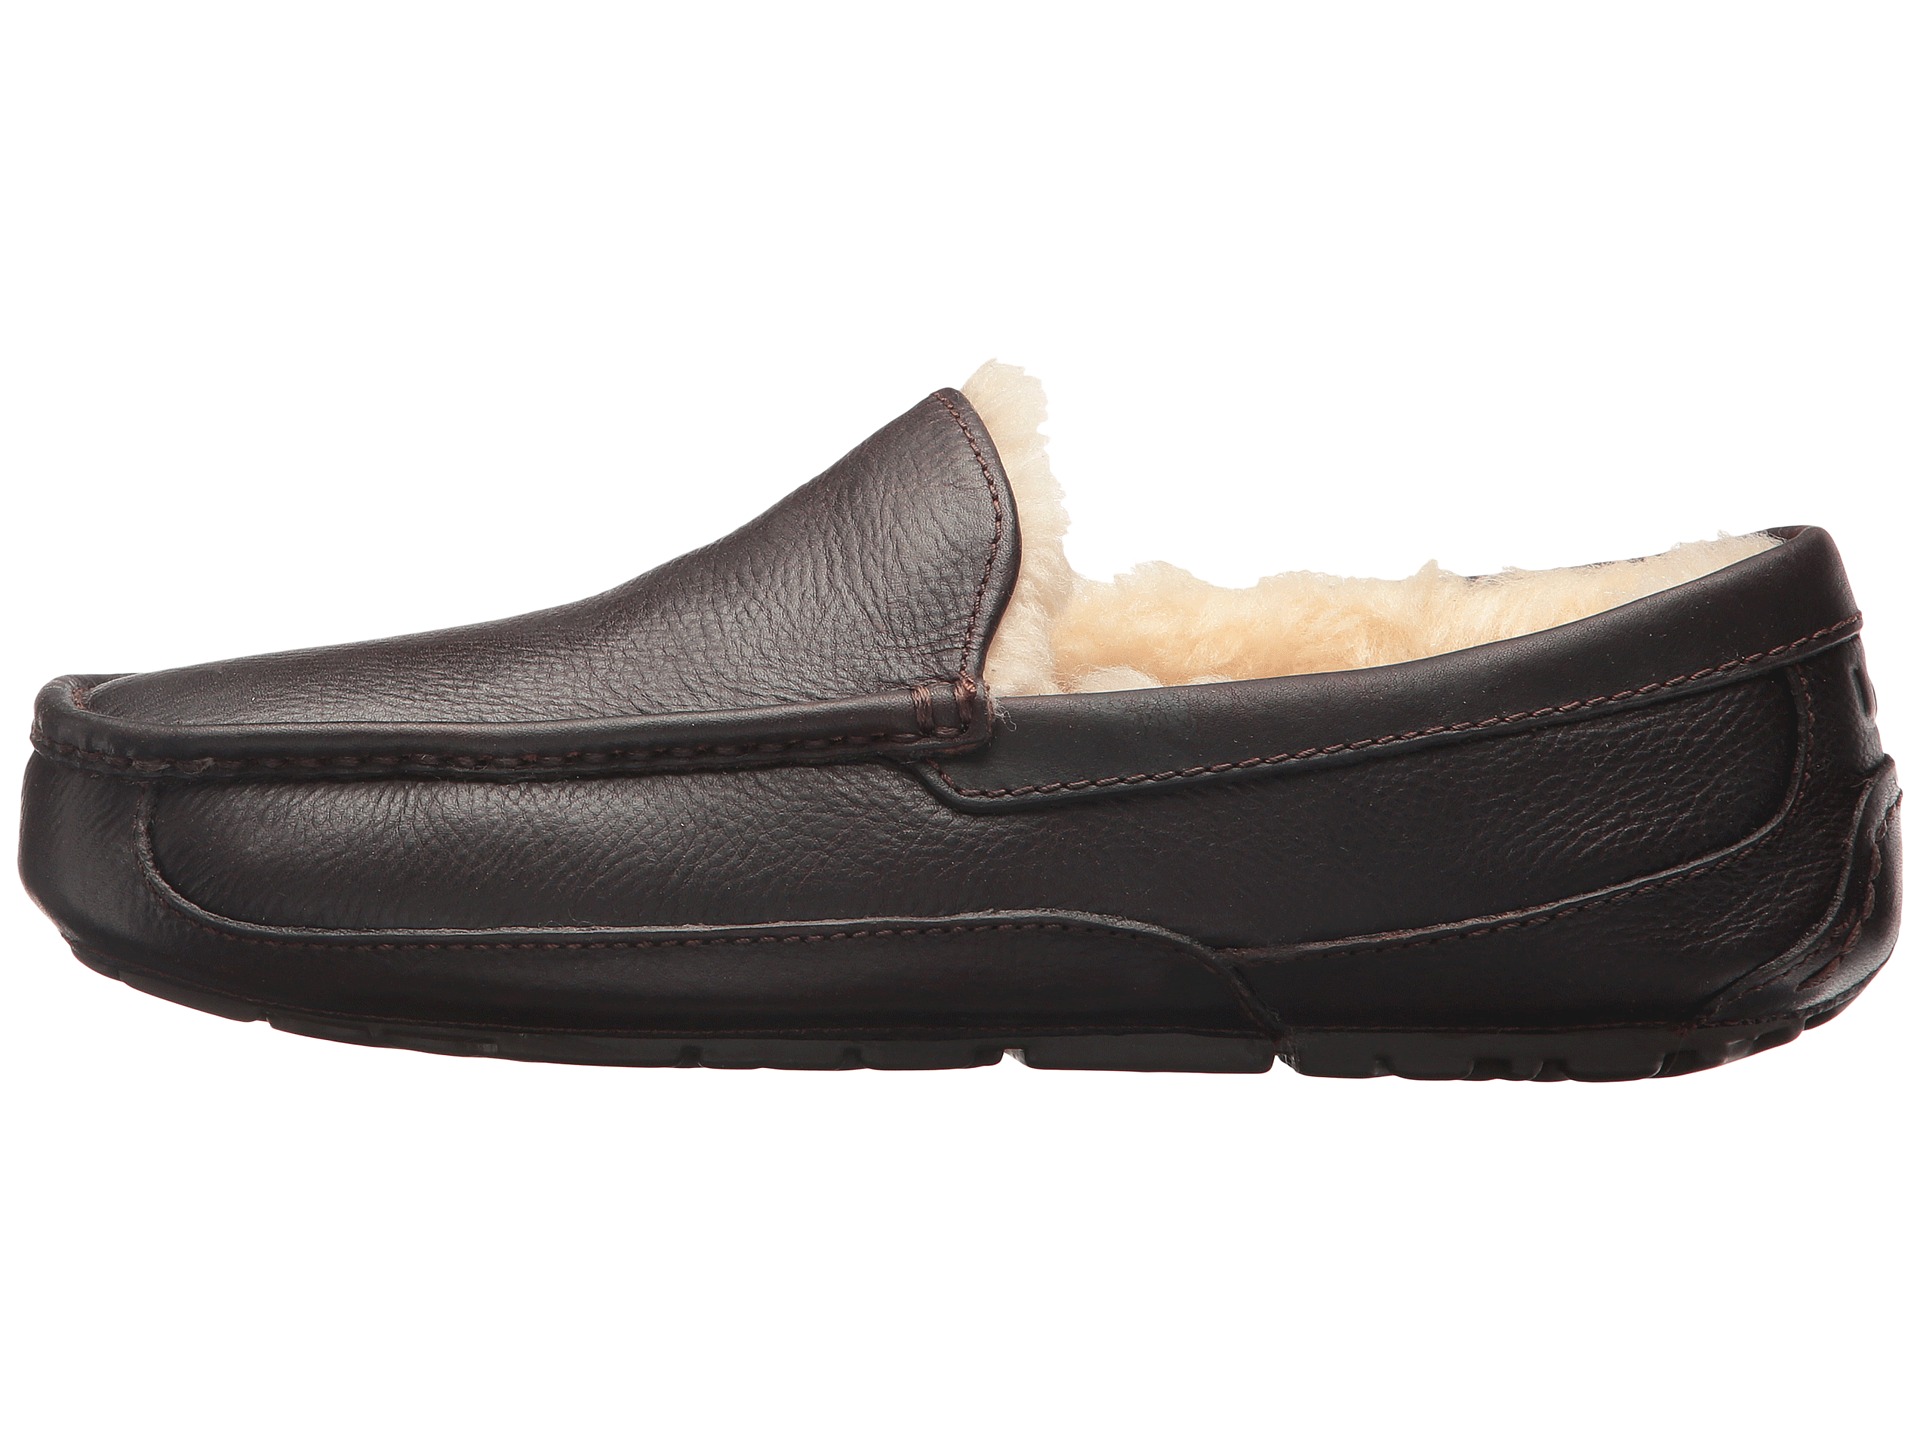 UGG Ascot Leather at Zappos.com